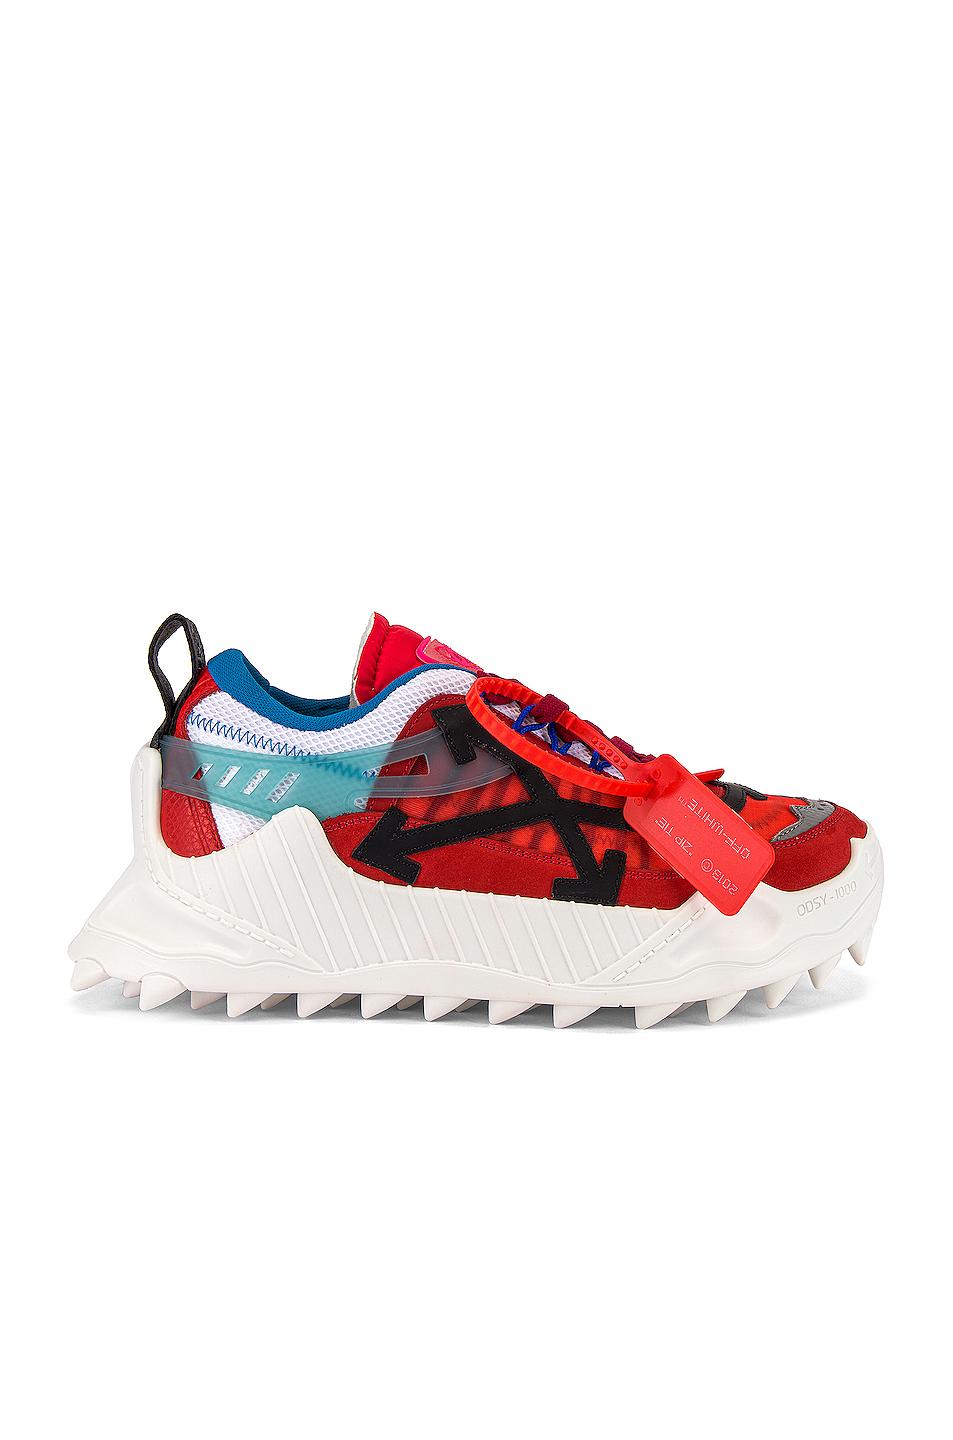 Off-White c/o Virgil Abloh Odsy-1000 Sneakers in Red for Men